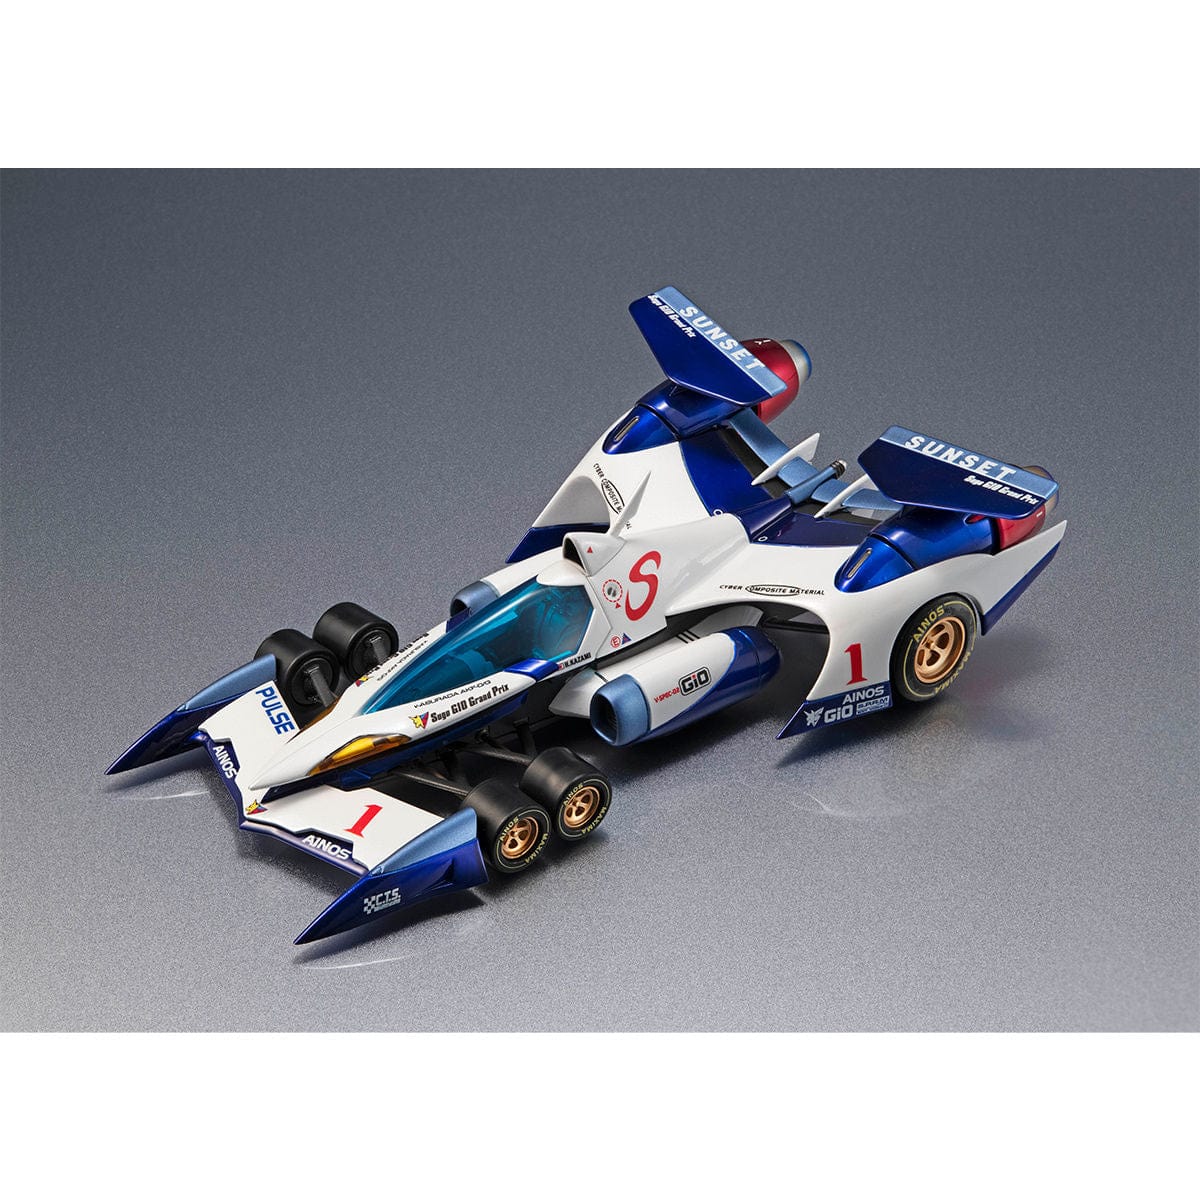 Megahouse VARIABLE ACTION Future GPX Cyber Formula SIN ν ASURADA AKF-0/G -Livery Edition-【with gift】